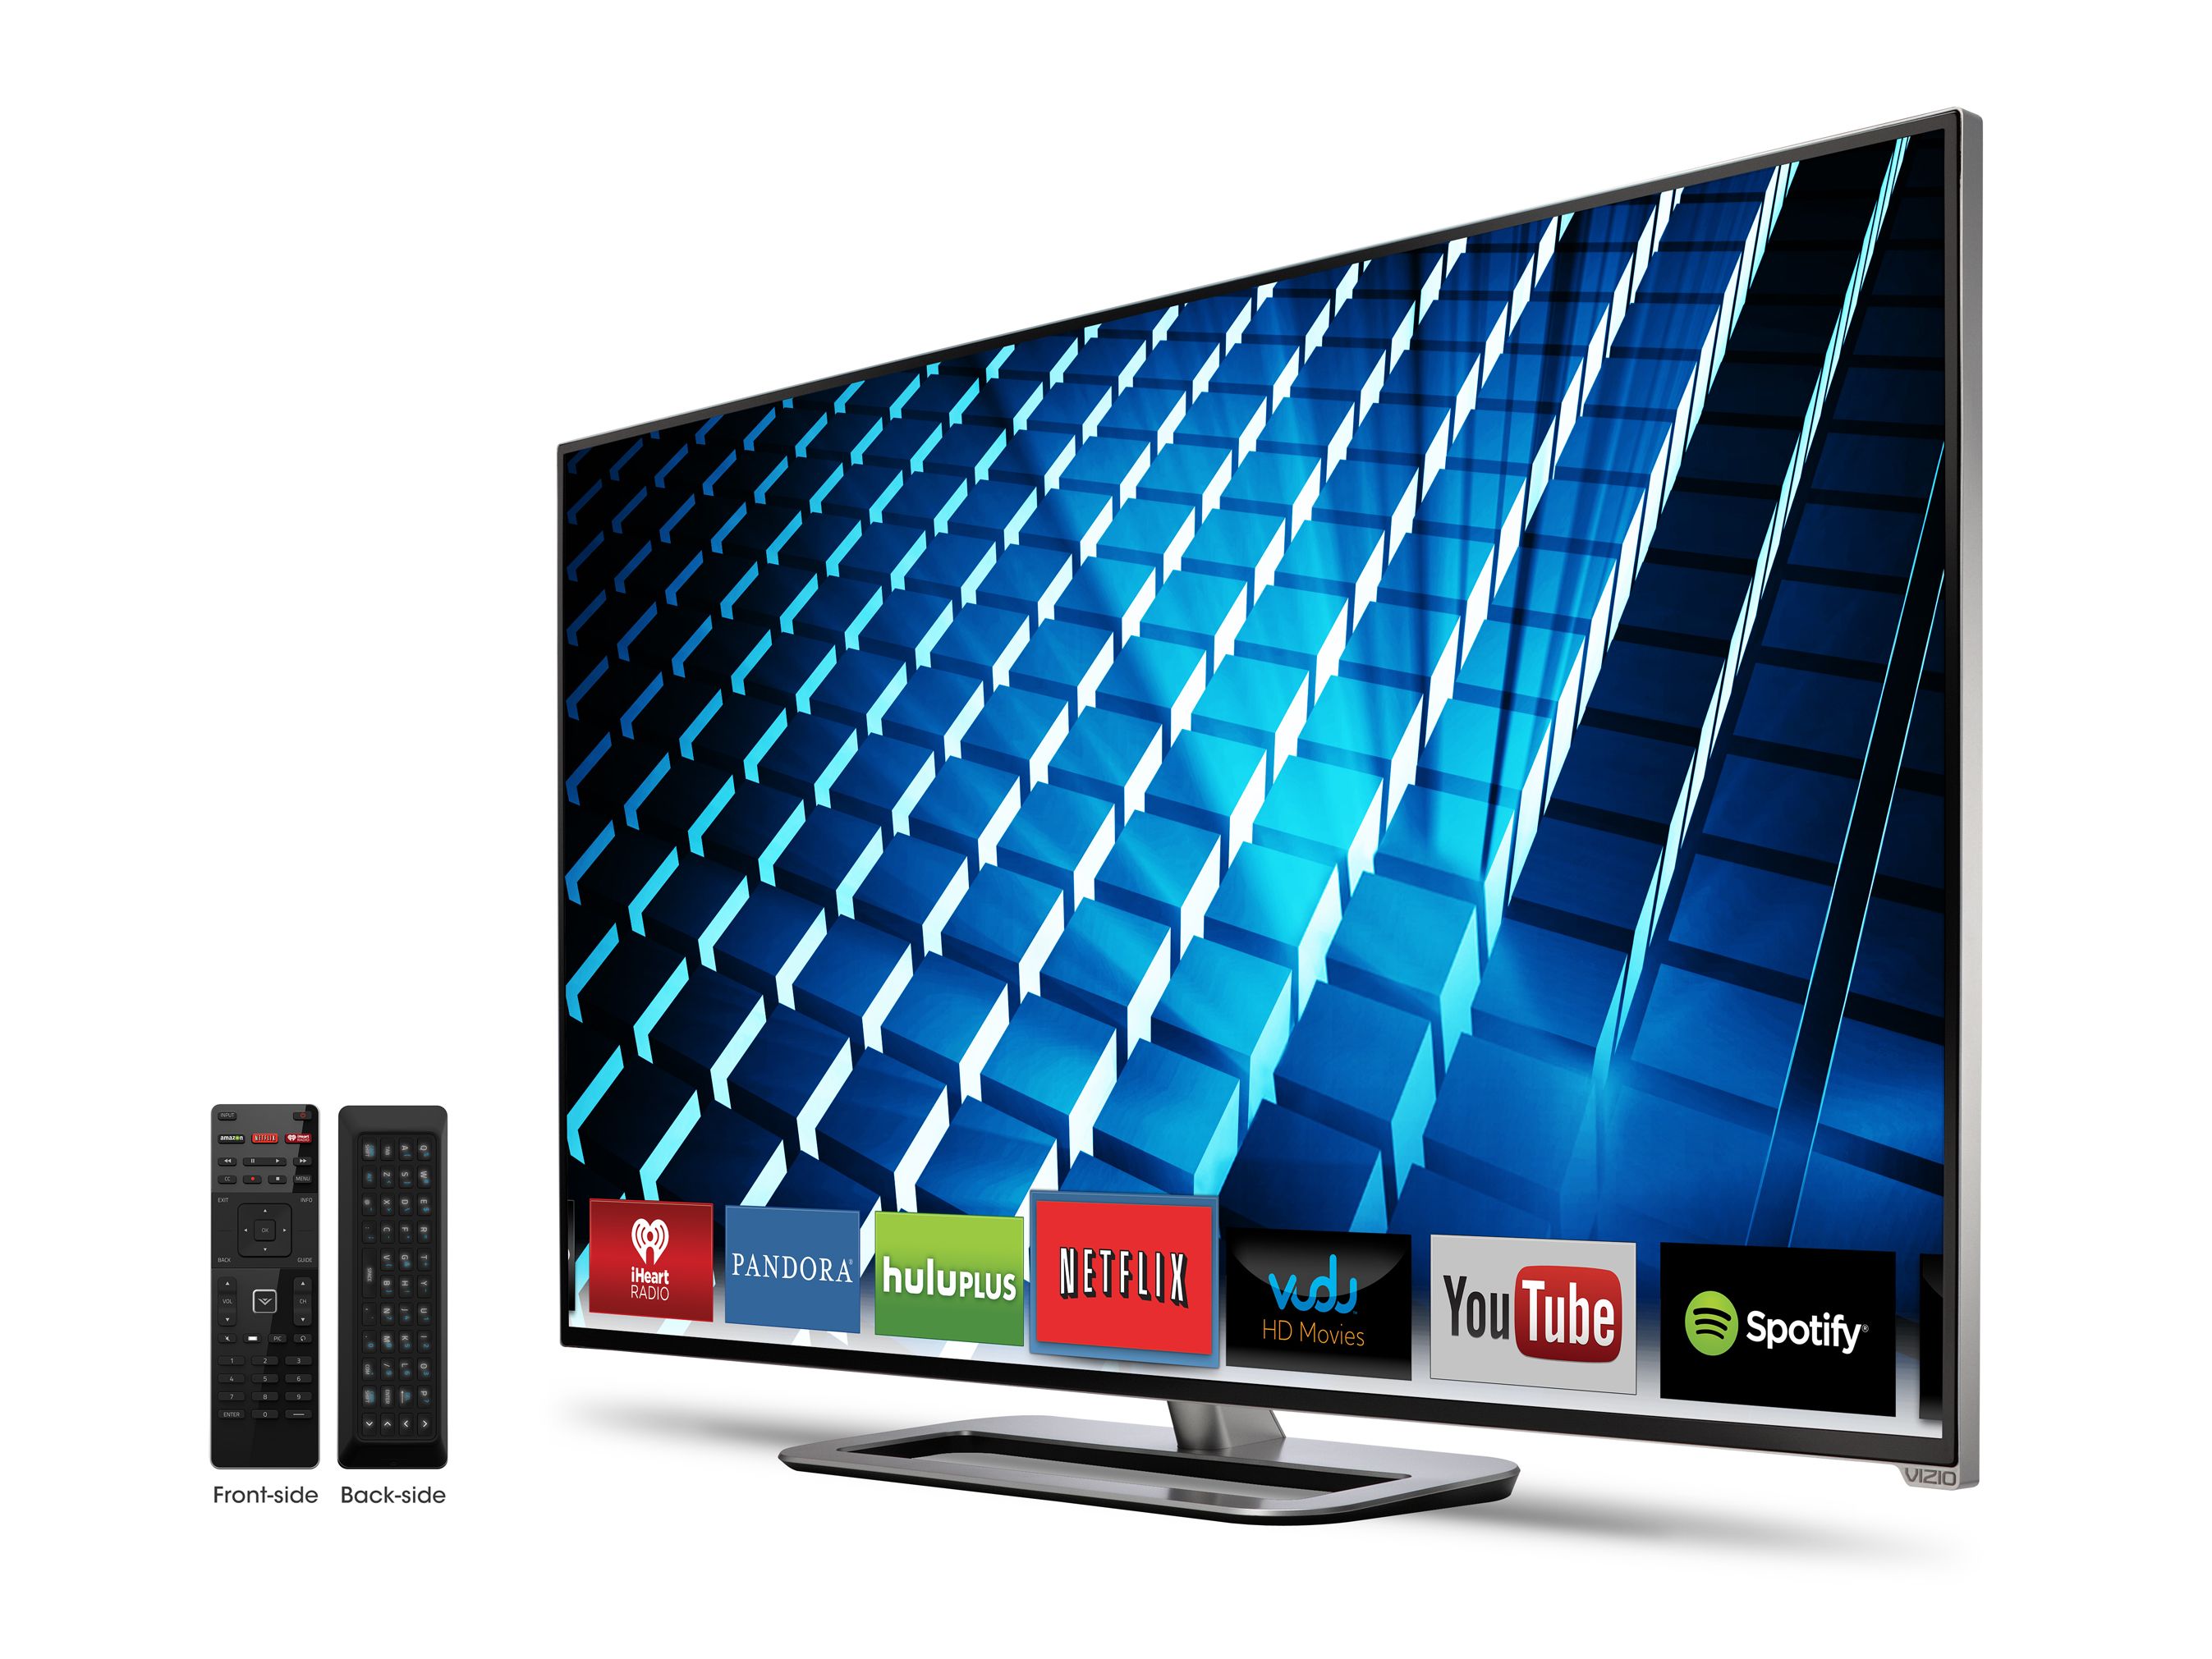 Vizio Adds Full-Array LED Backlighting, More LED Zones To M-Series TVs